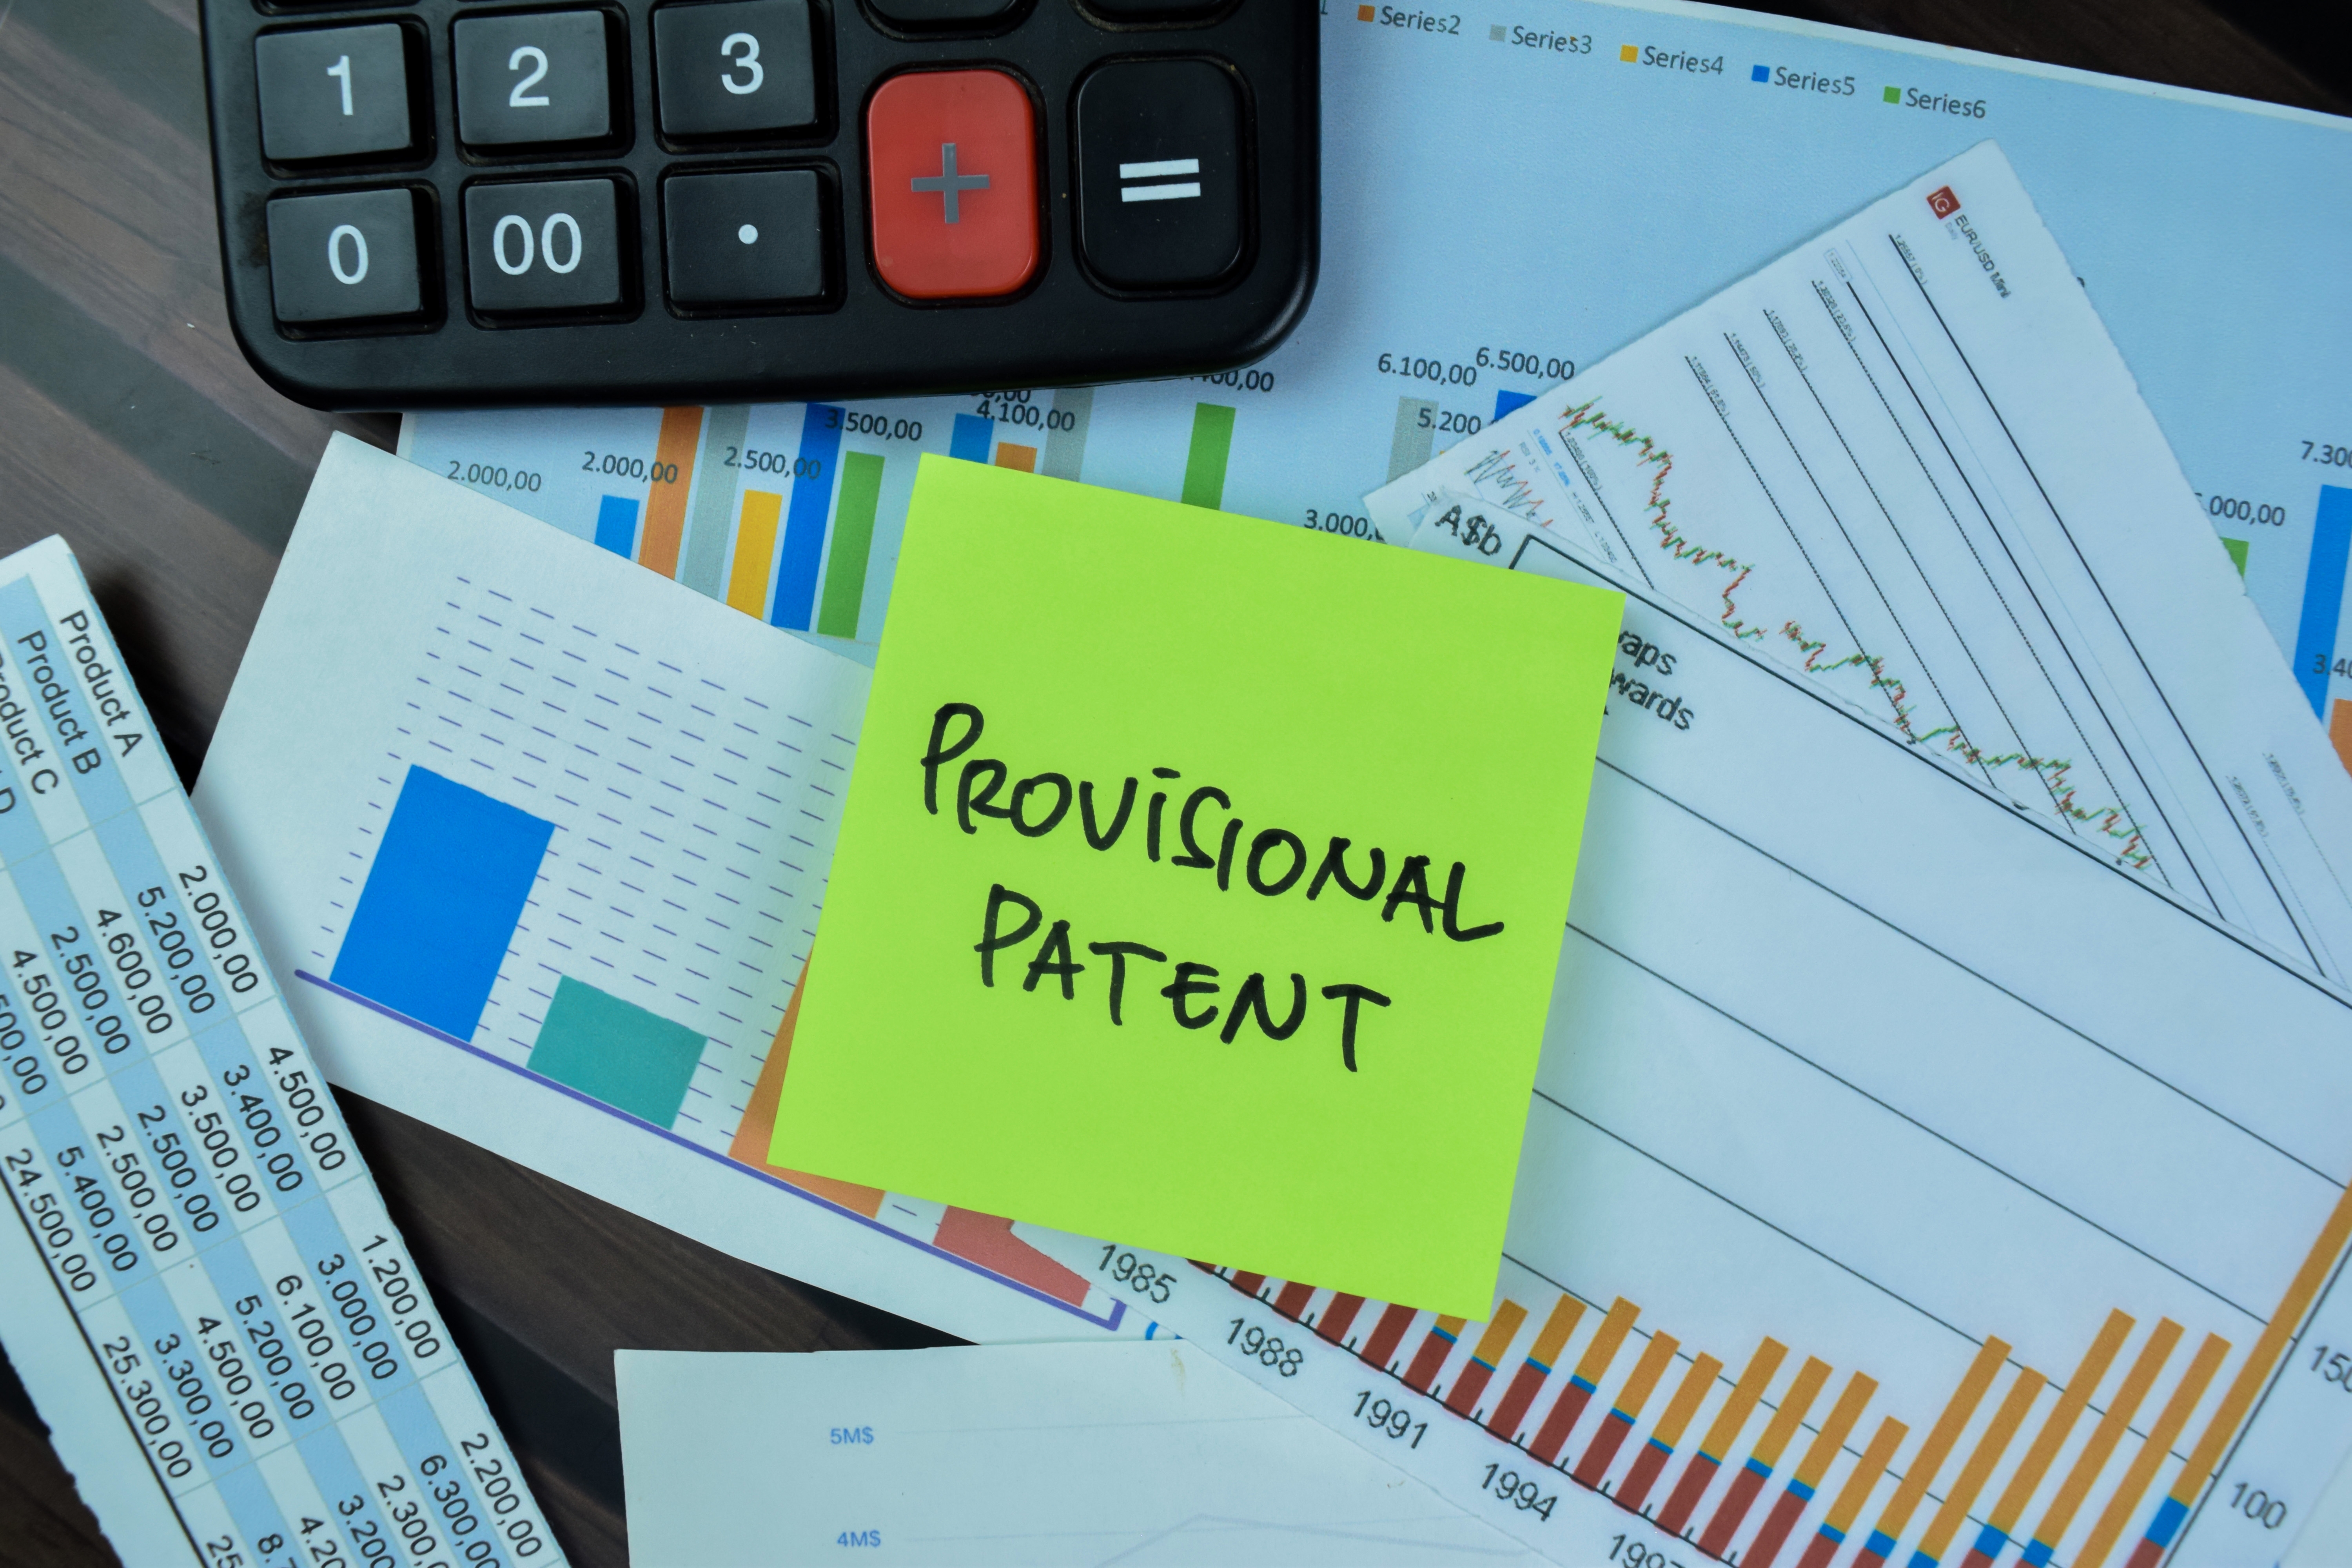 Provisional Patent Application in India